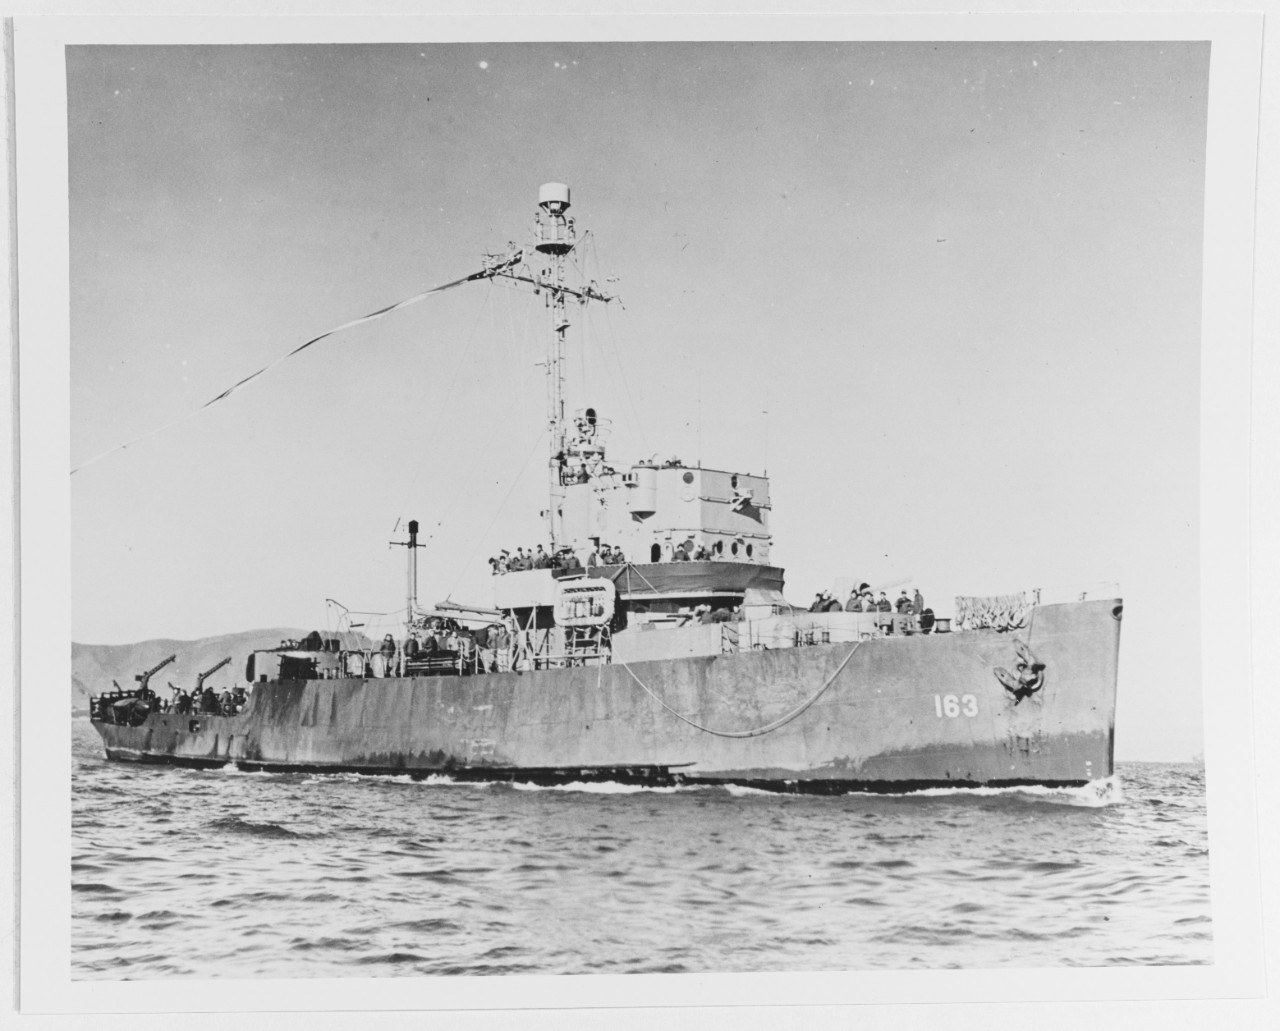 USS CONCISE (AM-163)